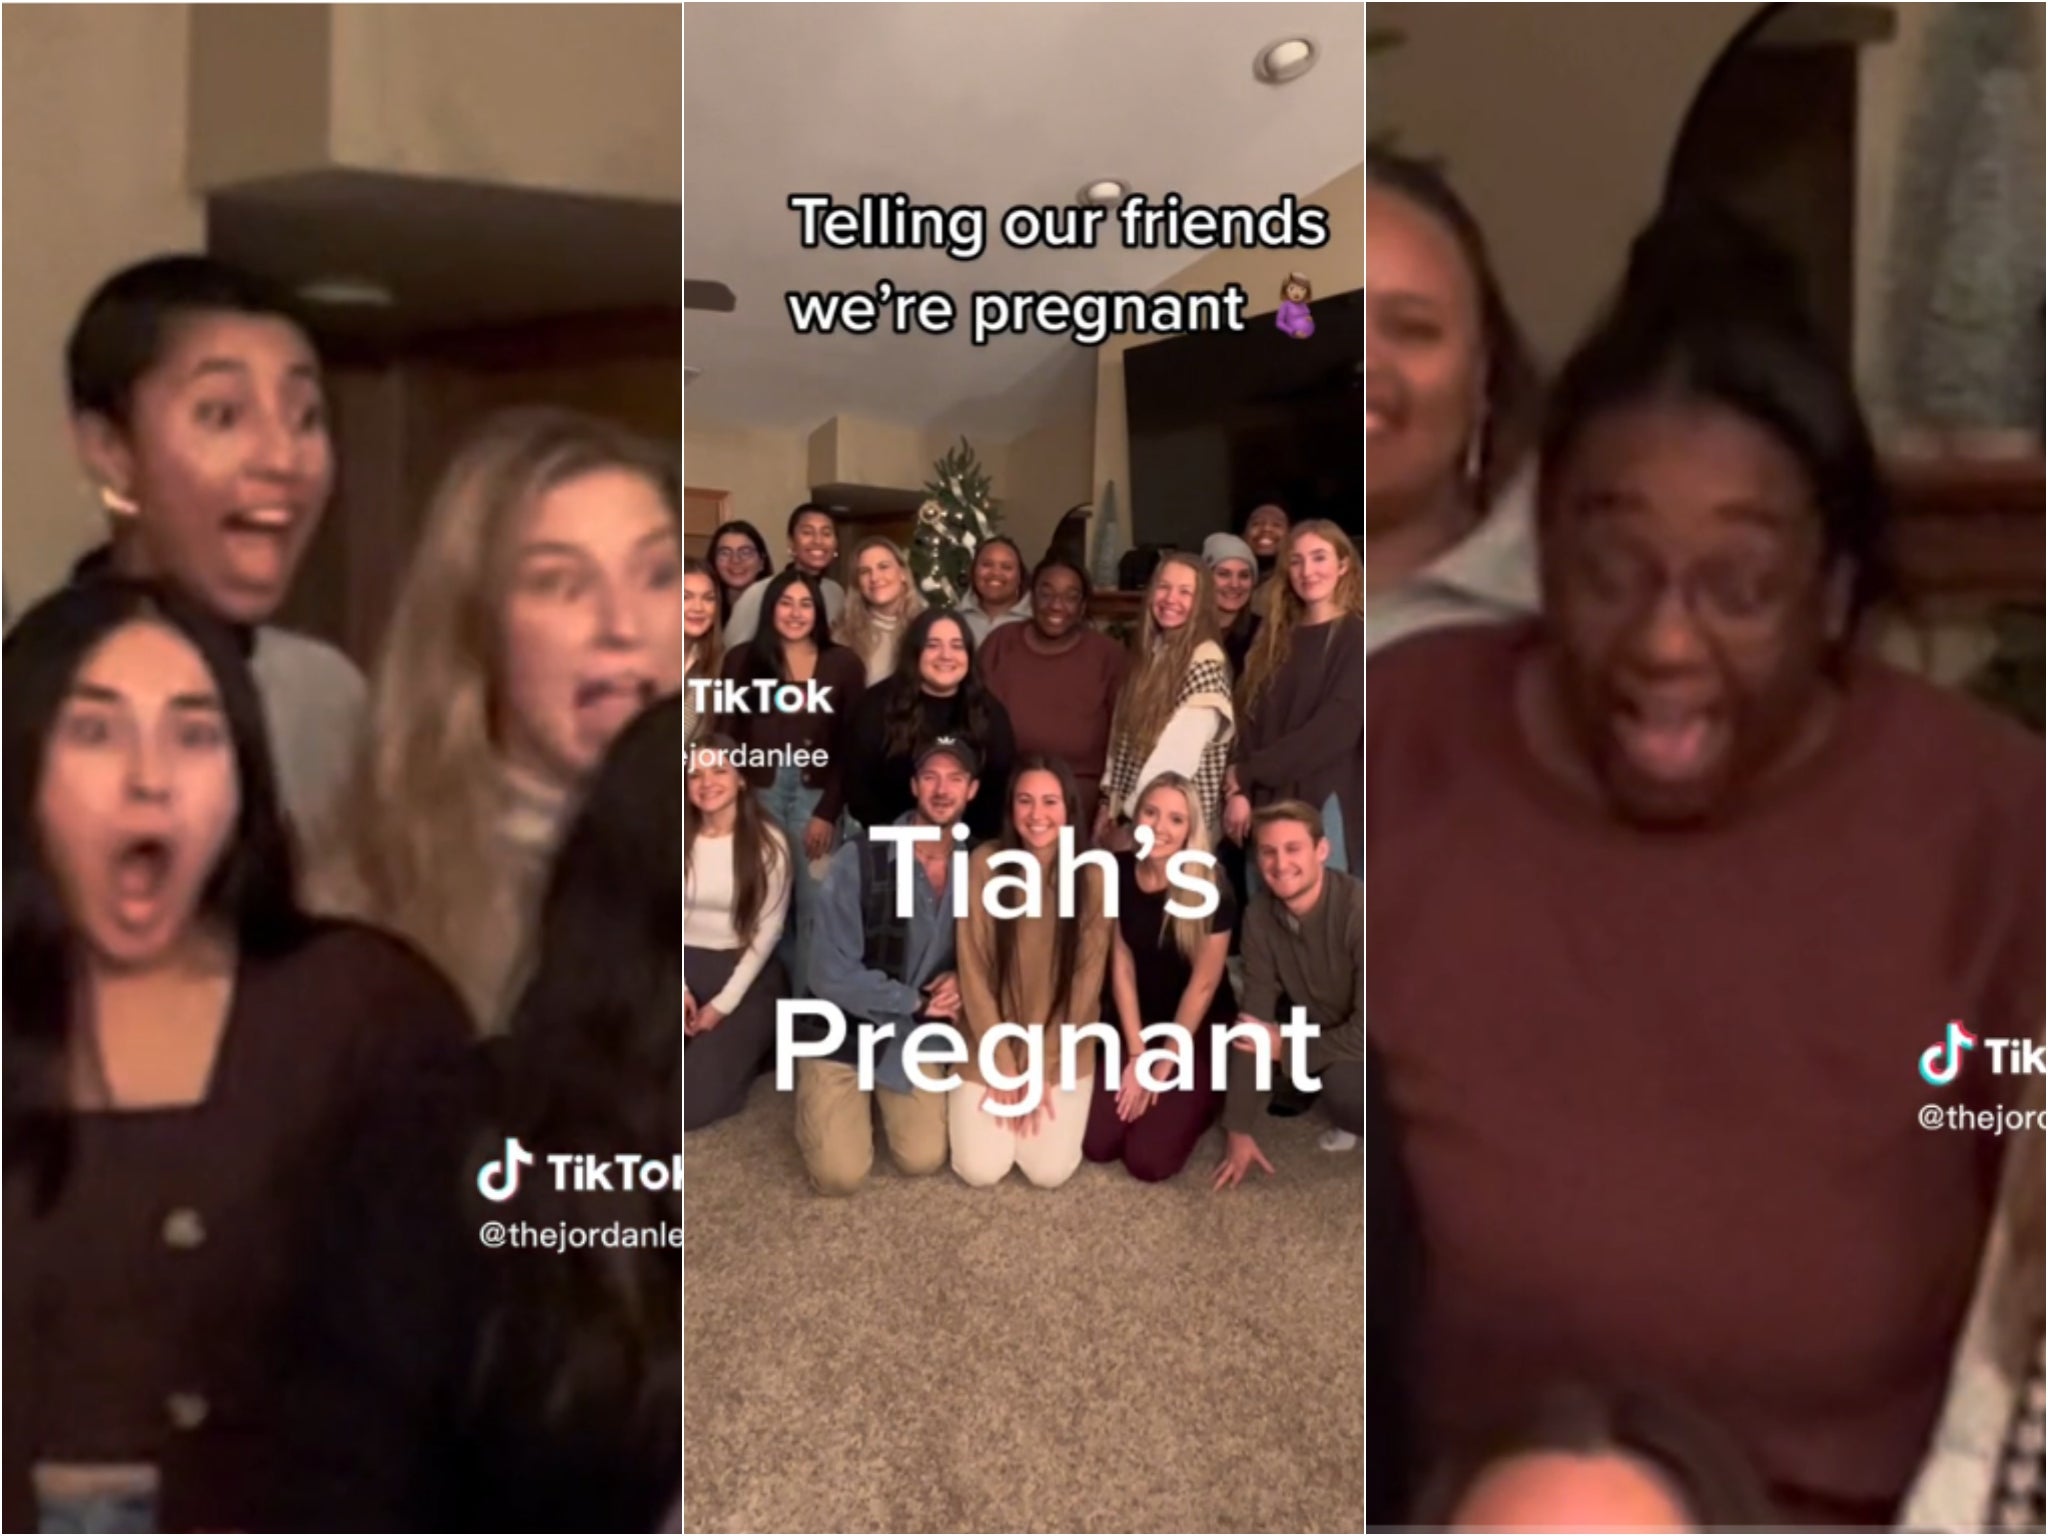 TikToker Jordan Lee posted a video of his friends’ reactions following his and his wife’s pregnancy announcement